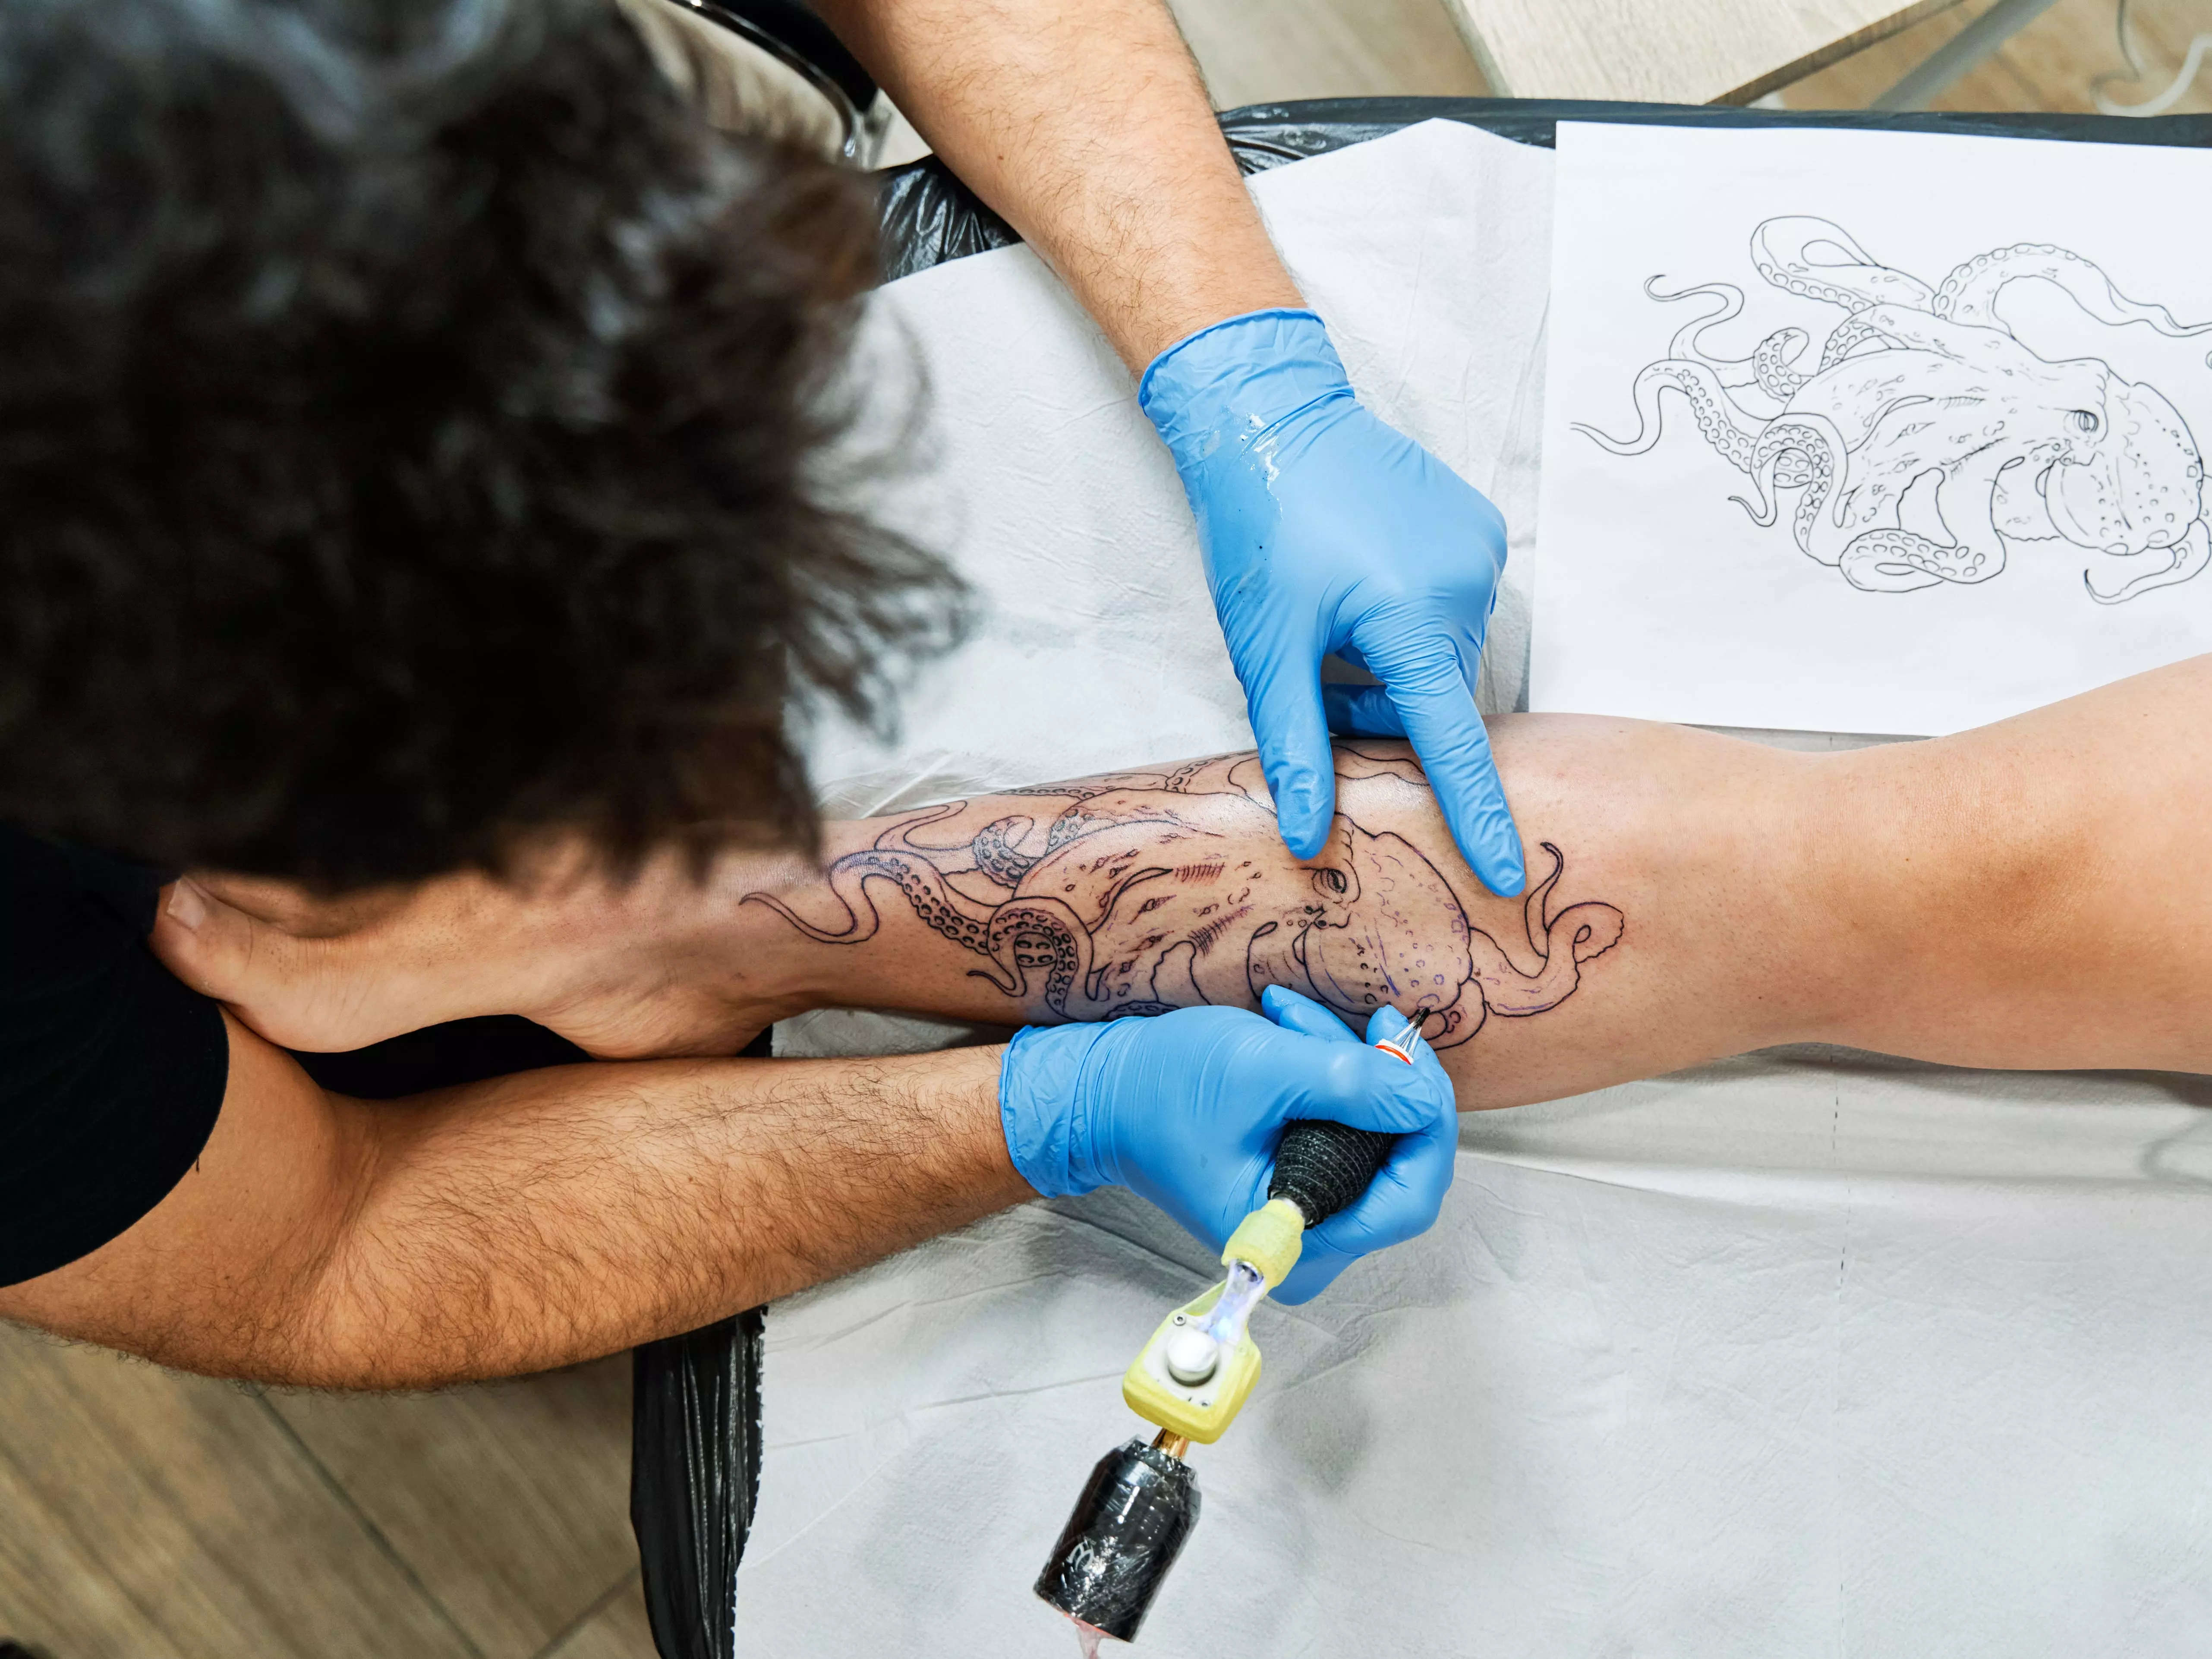 2022: Popular Tattoos and Designs That Are Out This Year, Per Artists